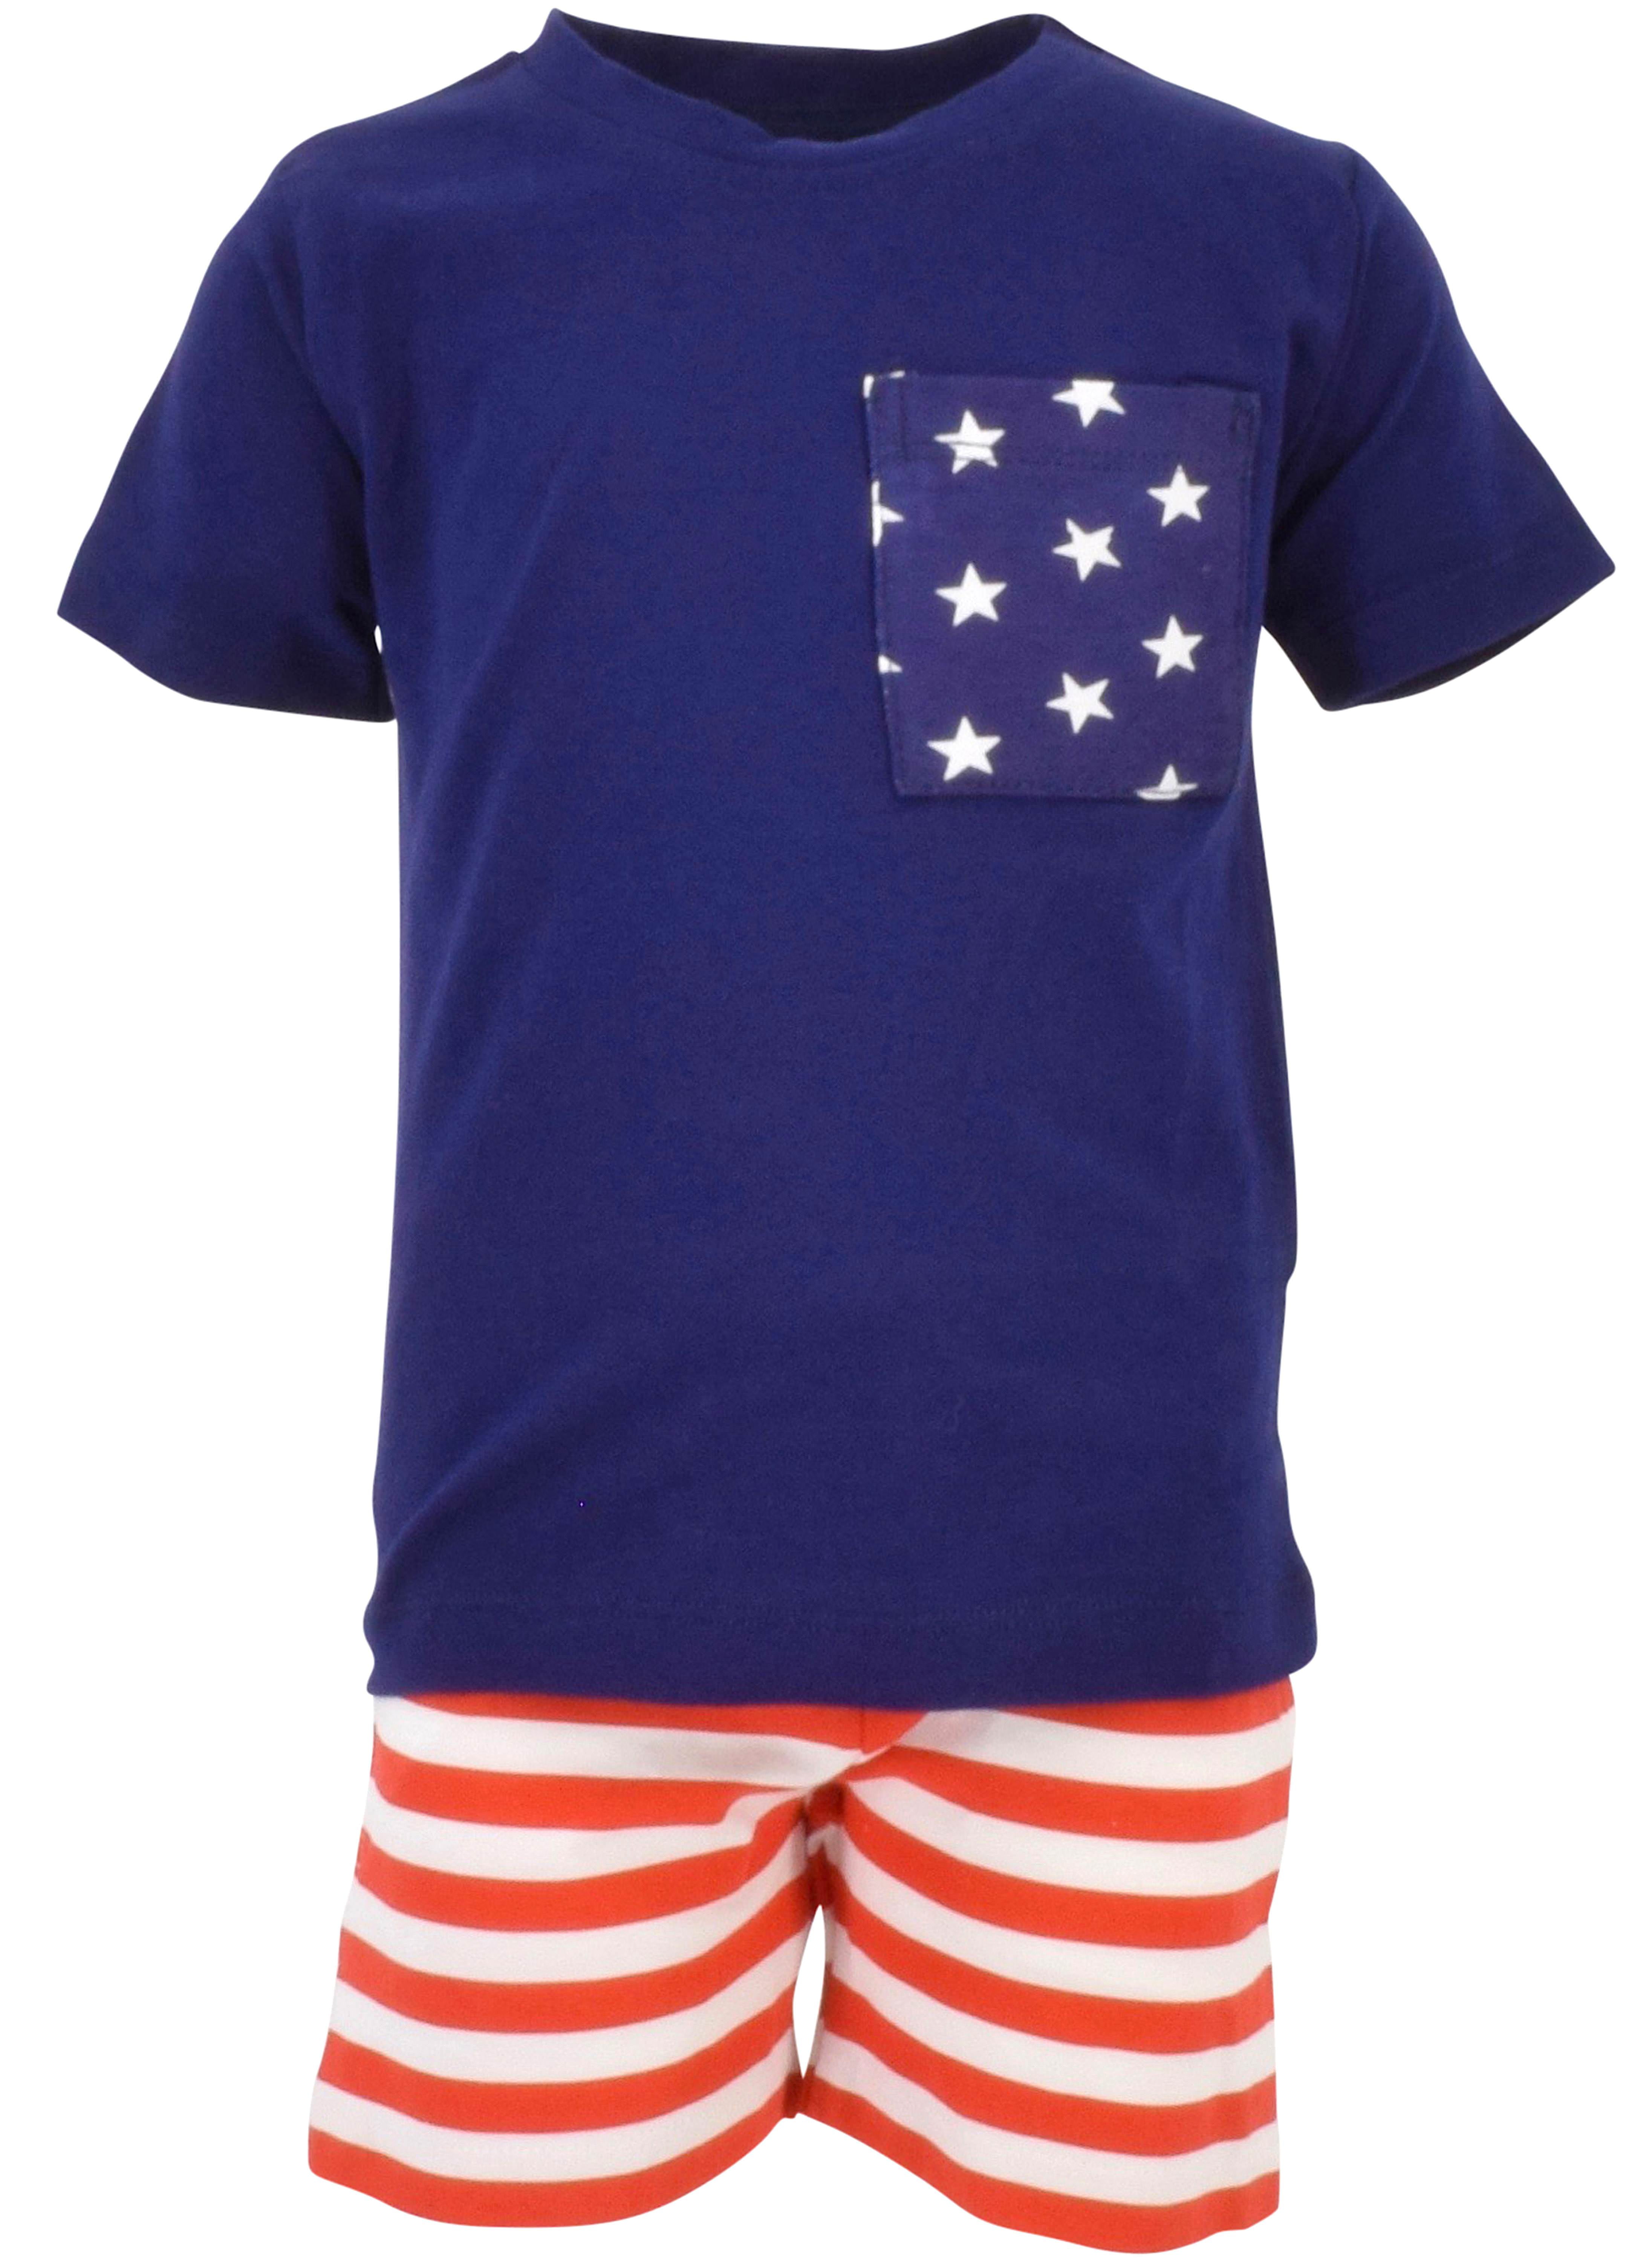 FYBITBO Baby Boy 4th of July Outfits Short Sleeve Tee Shirt and Casual Shorts 2Pcs Fourth of July Summer Outfit 